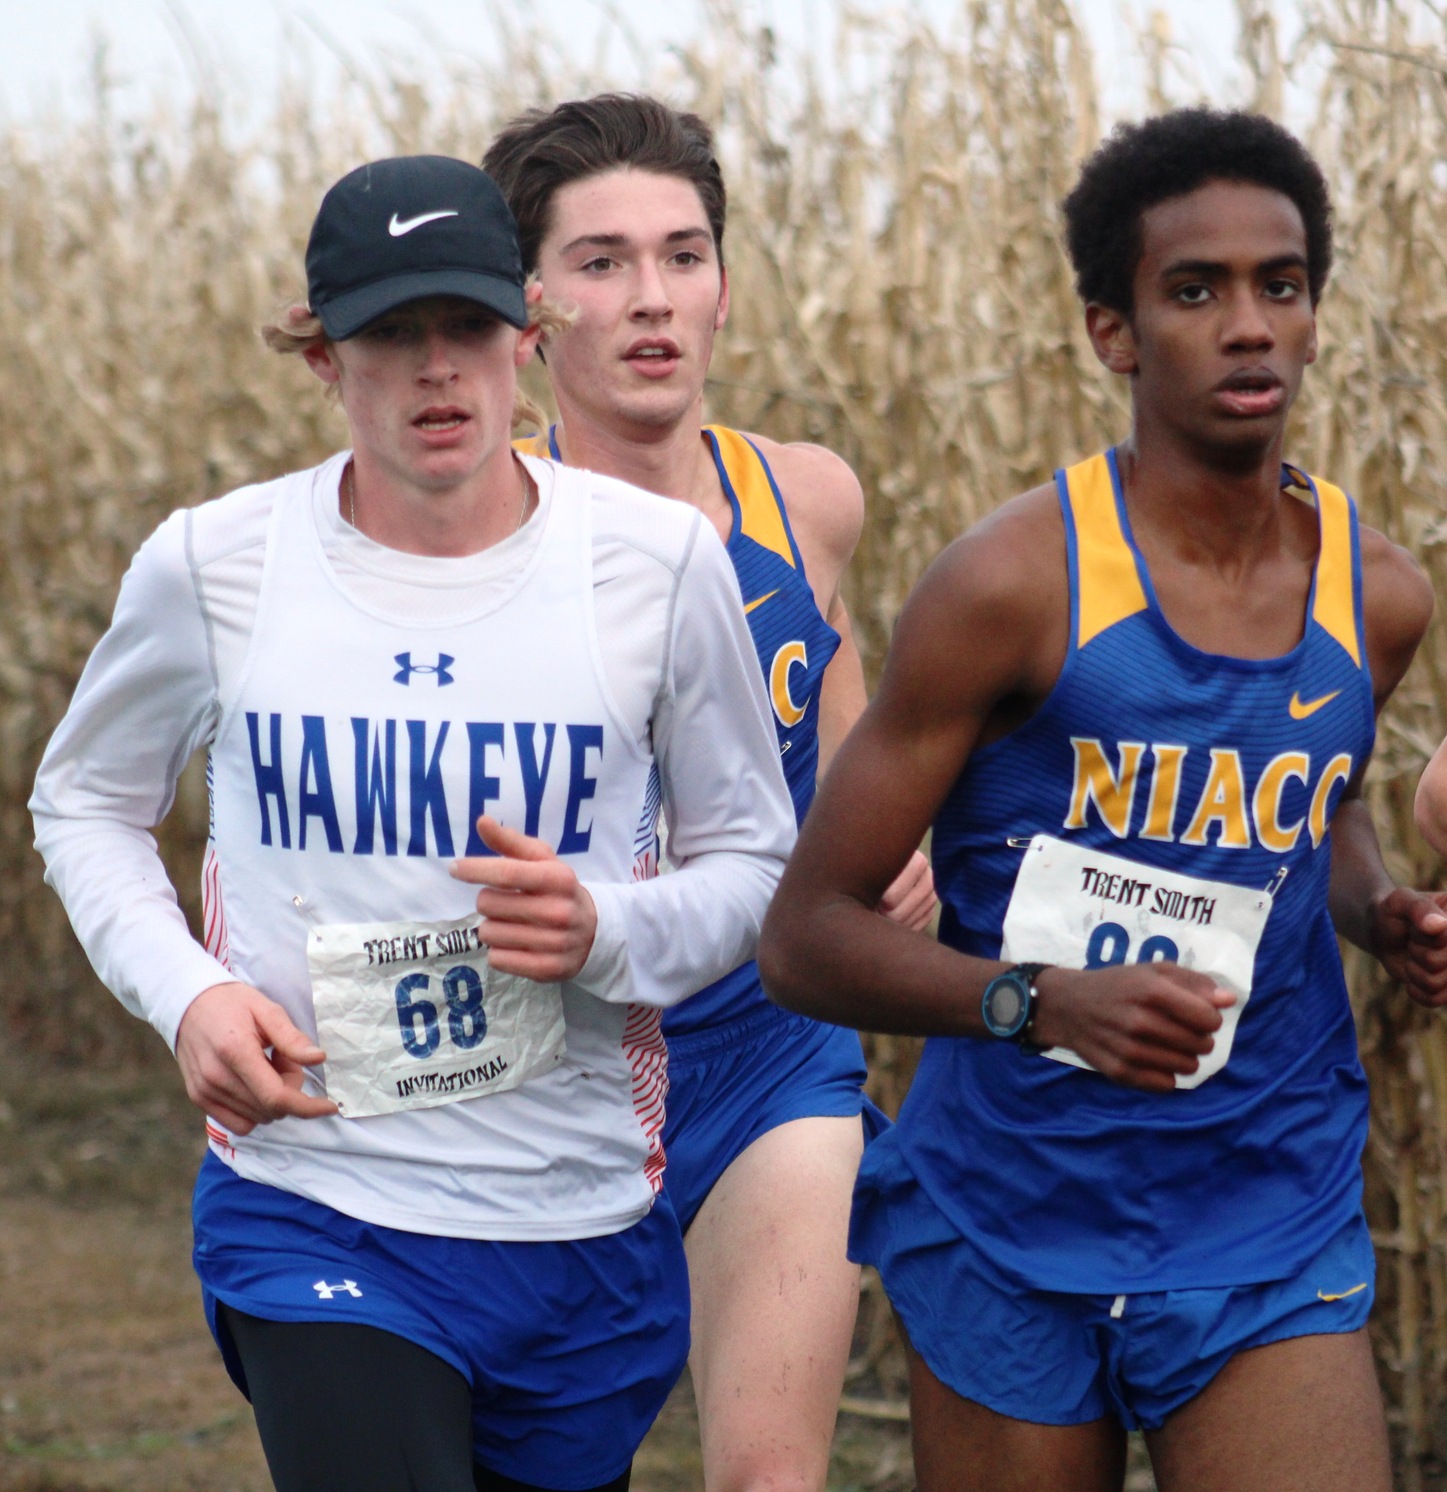 NIACC's Adbiaziz Wako (front) and Gavin Connell run at Friday's Trent Smith Invitational.